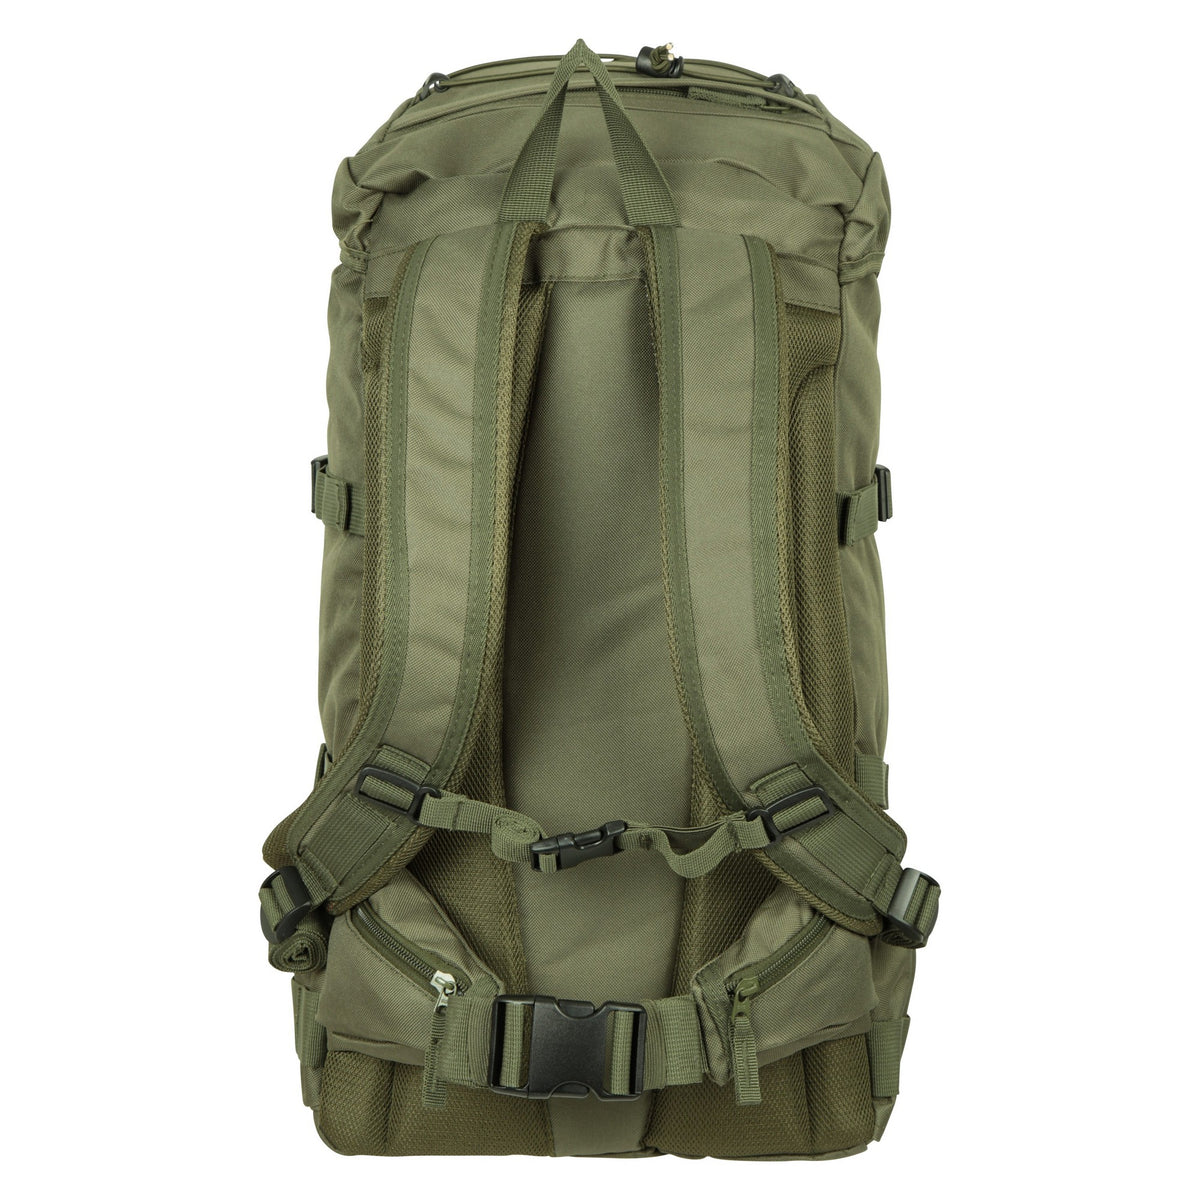 Mountain Warehouse High 50L Backpack | Discounts on great Brands